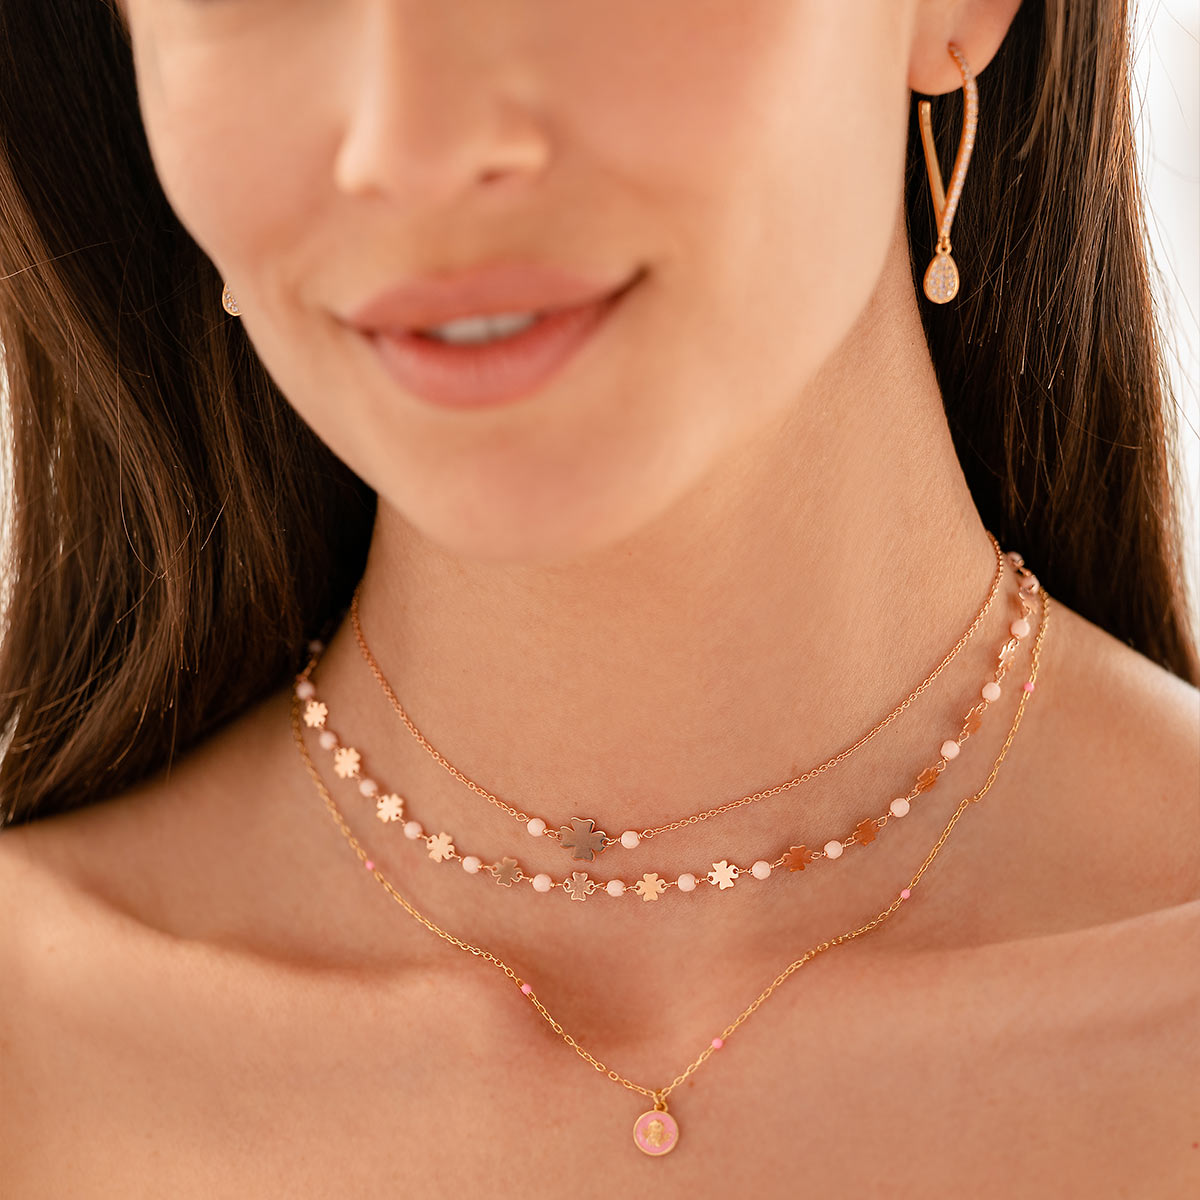 Four-leaf clover chain necklace with Pink Stones - Io&Ro